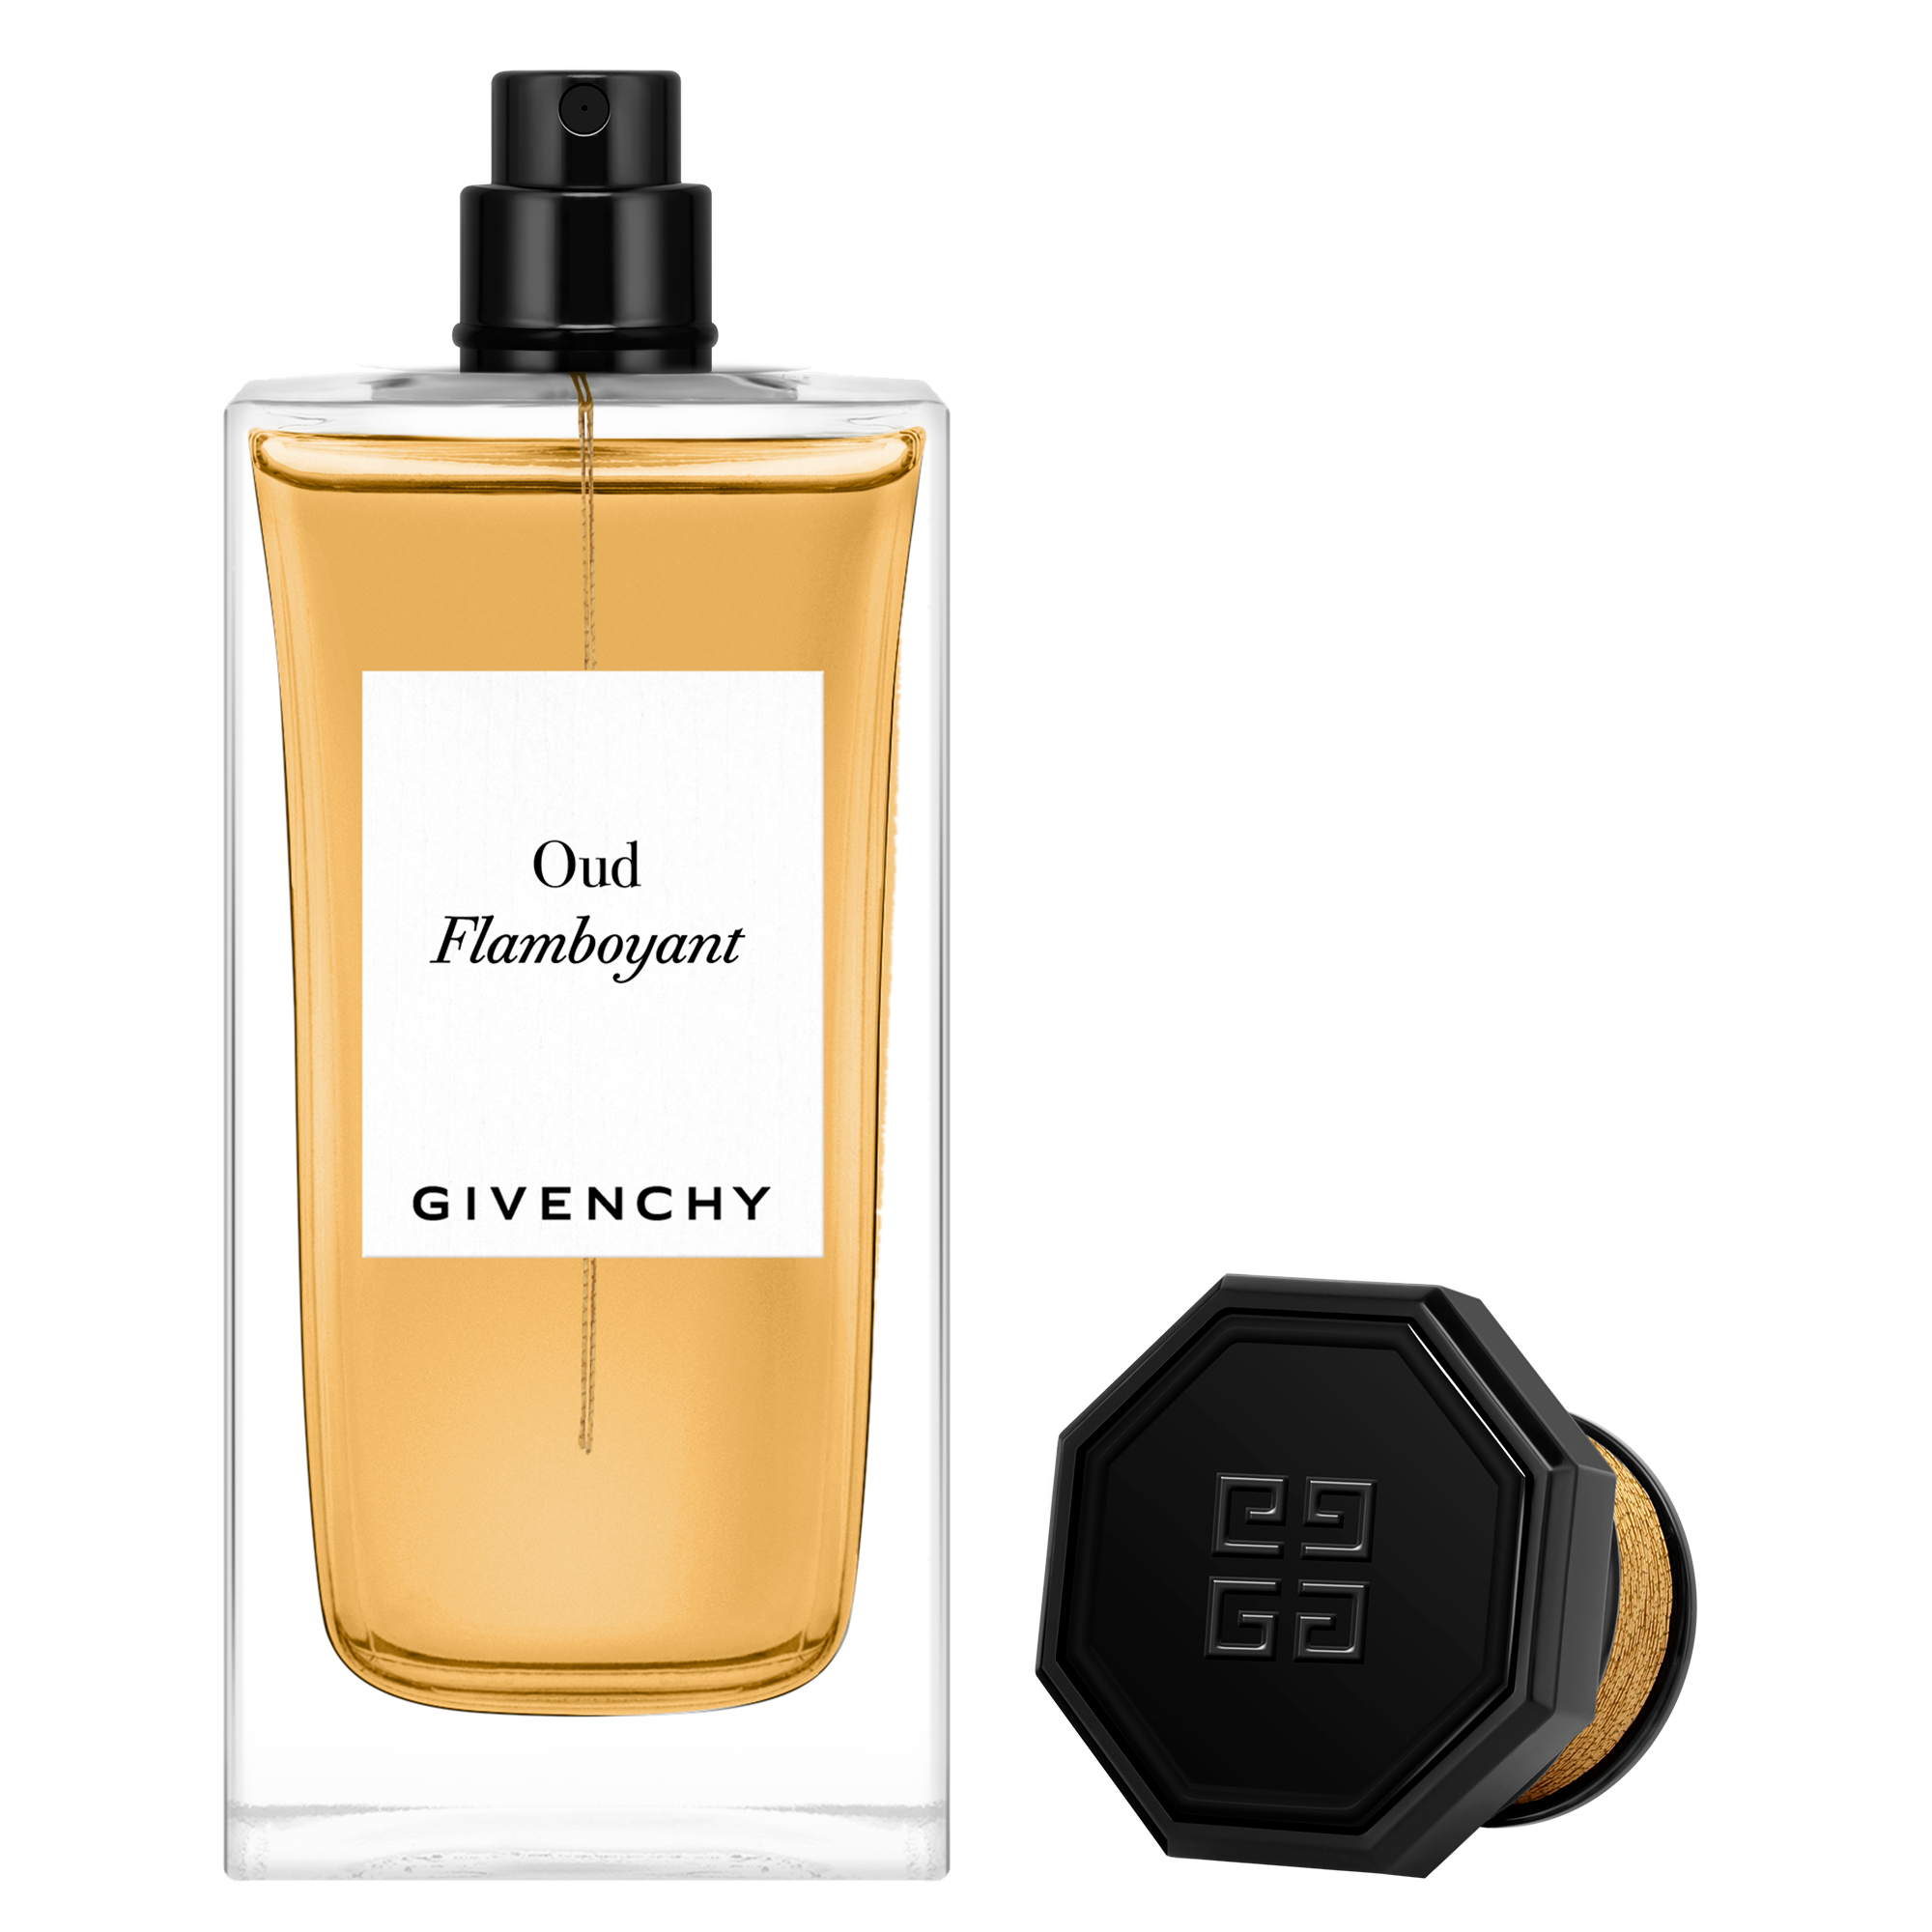 oud givenchy